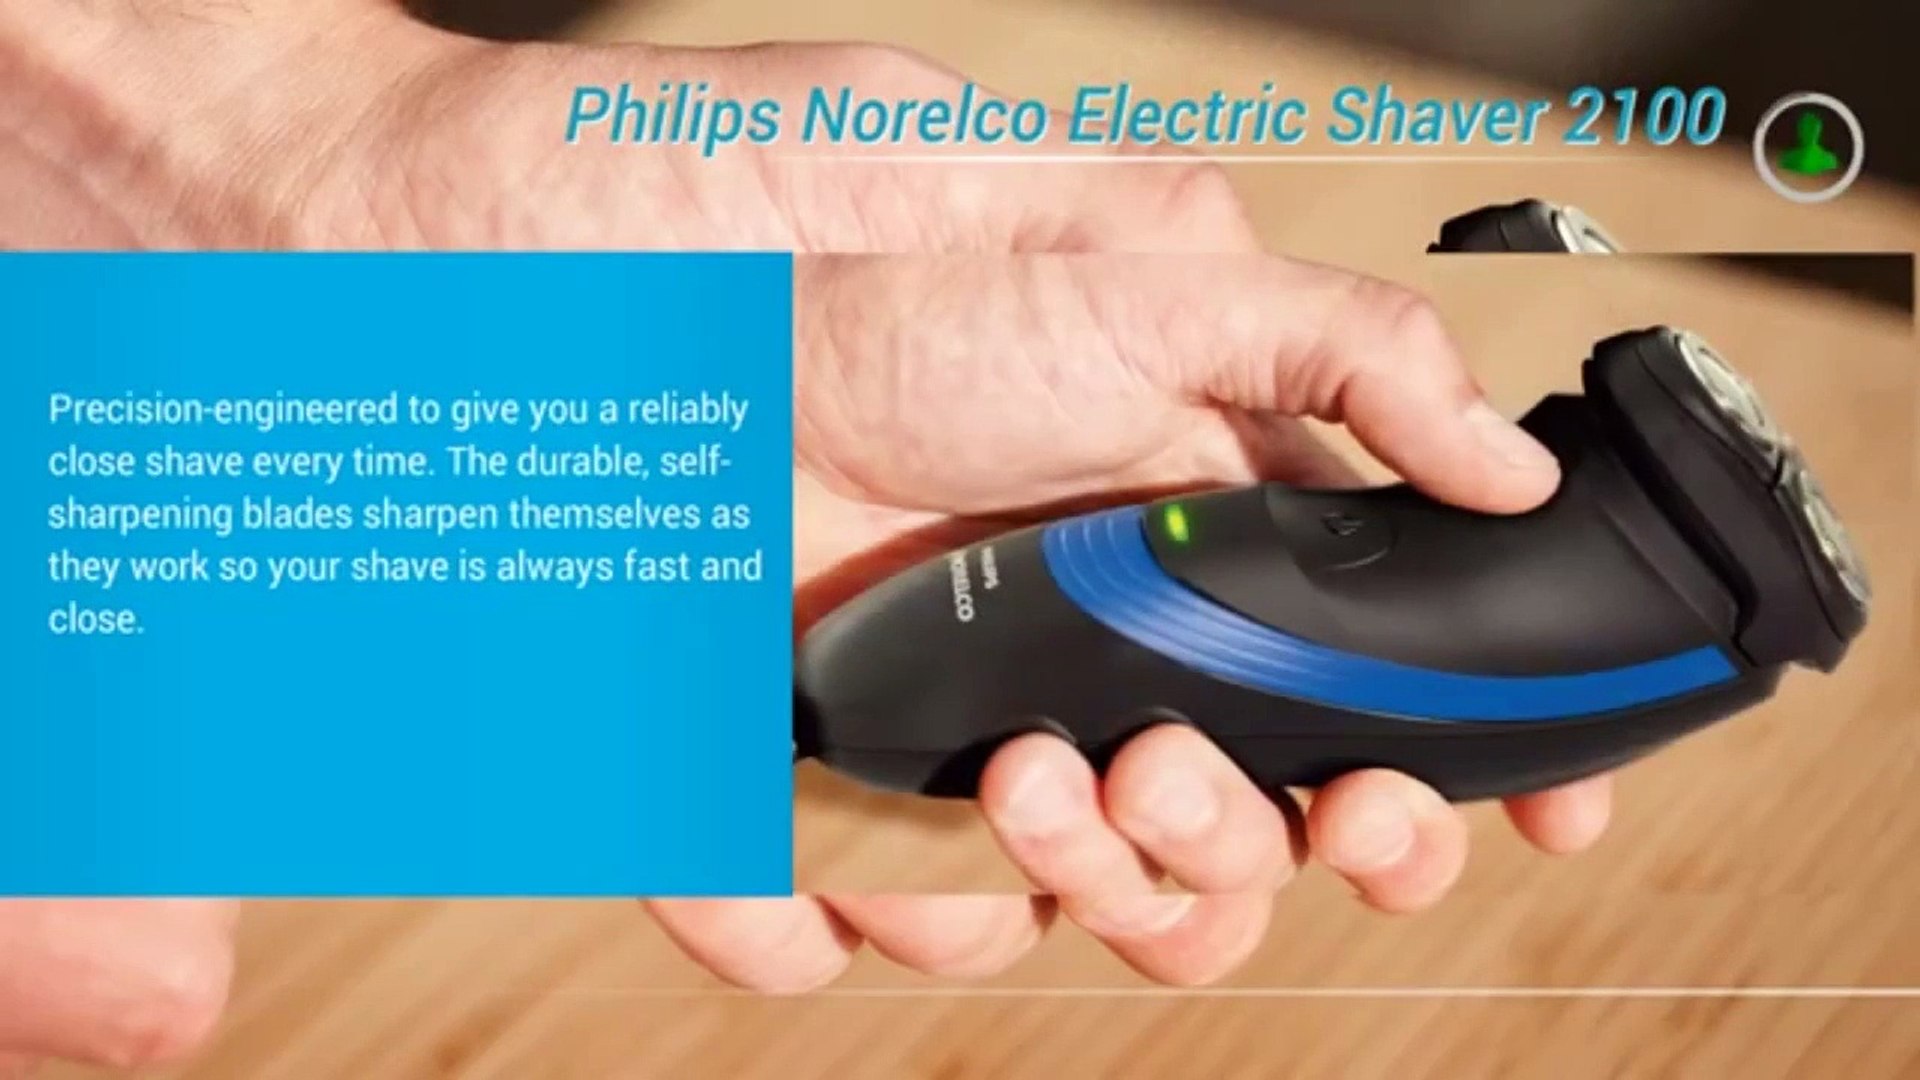 Philips Norelco Electric Shaver 2100, S1560/81 Review - video Dailymotion